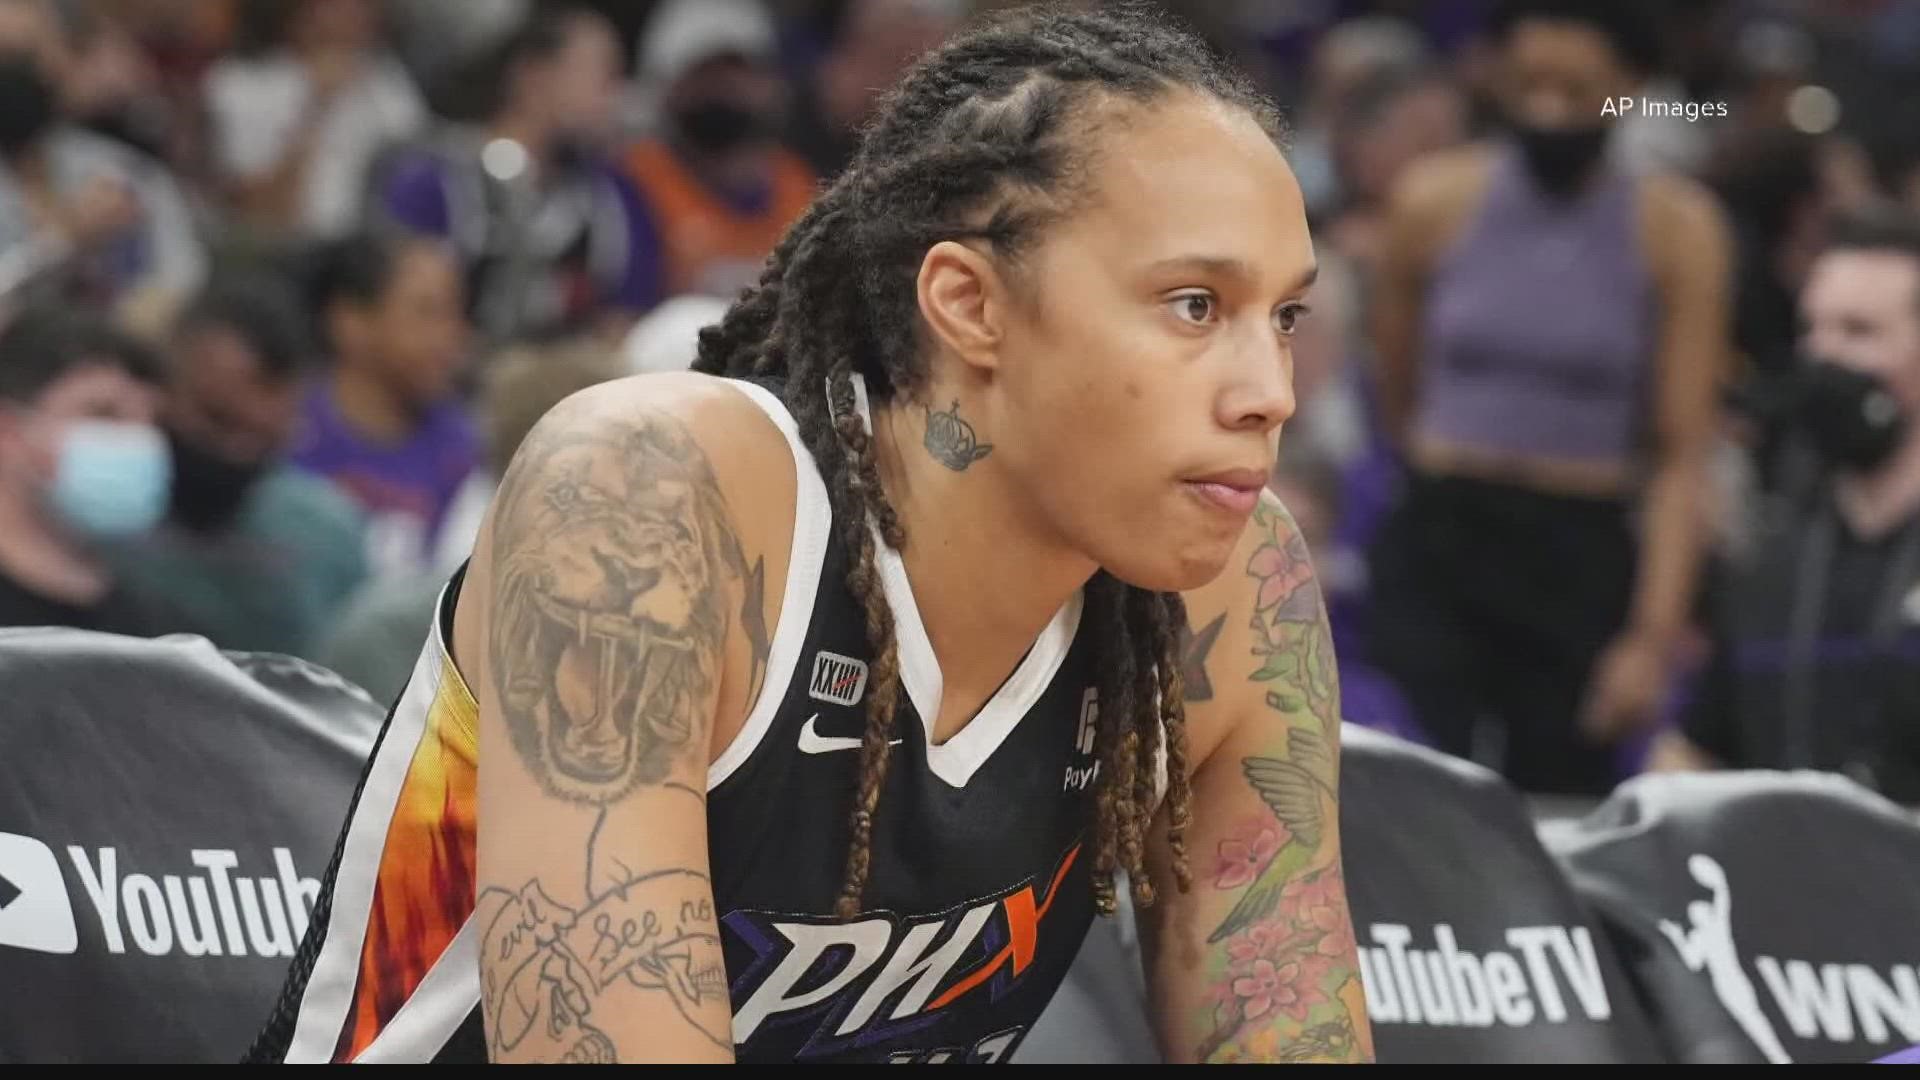 Brittney Griner's wife, Cherelle Griner, says a scheduled call between the couple didn't take place over the weekend. A staffing shortage is being blamed.